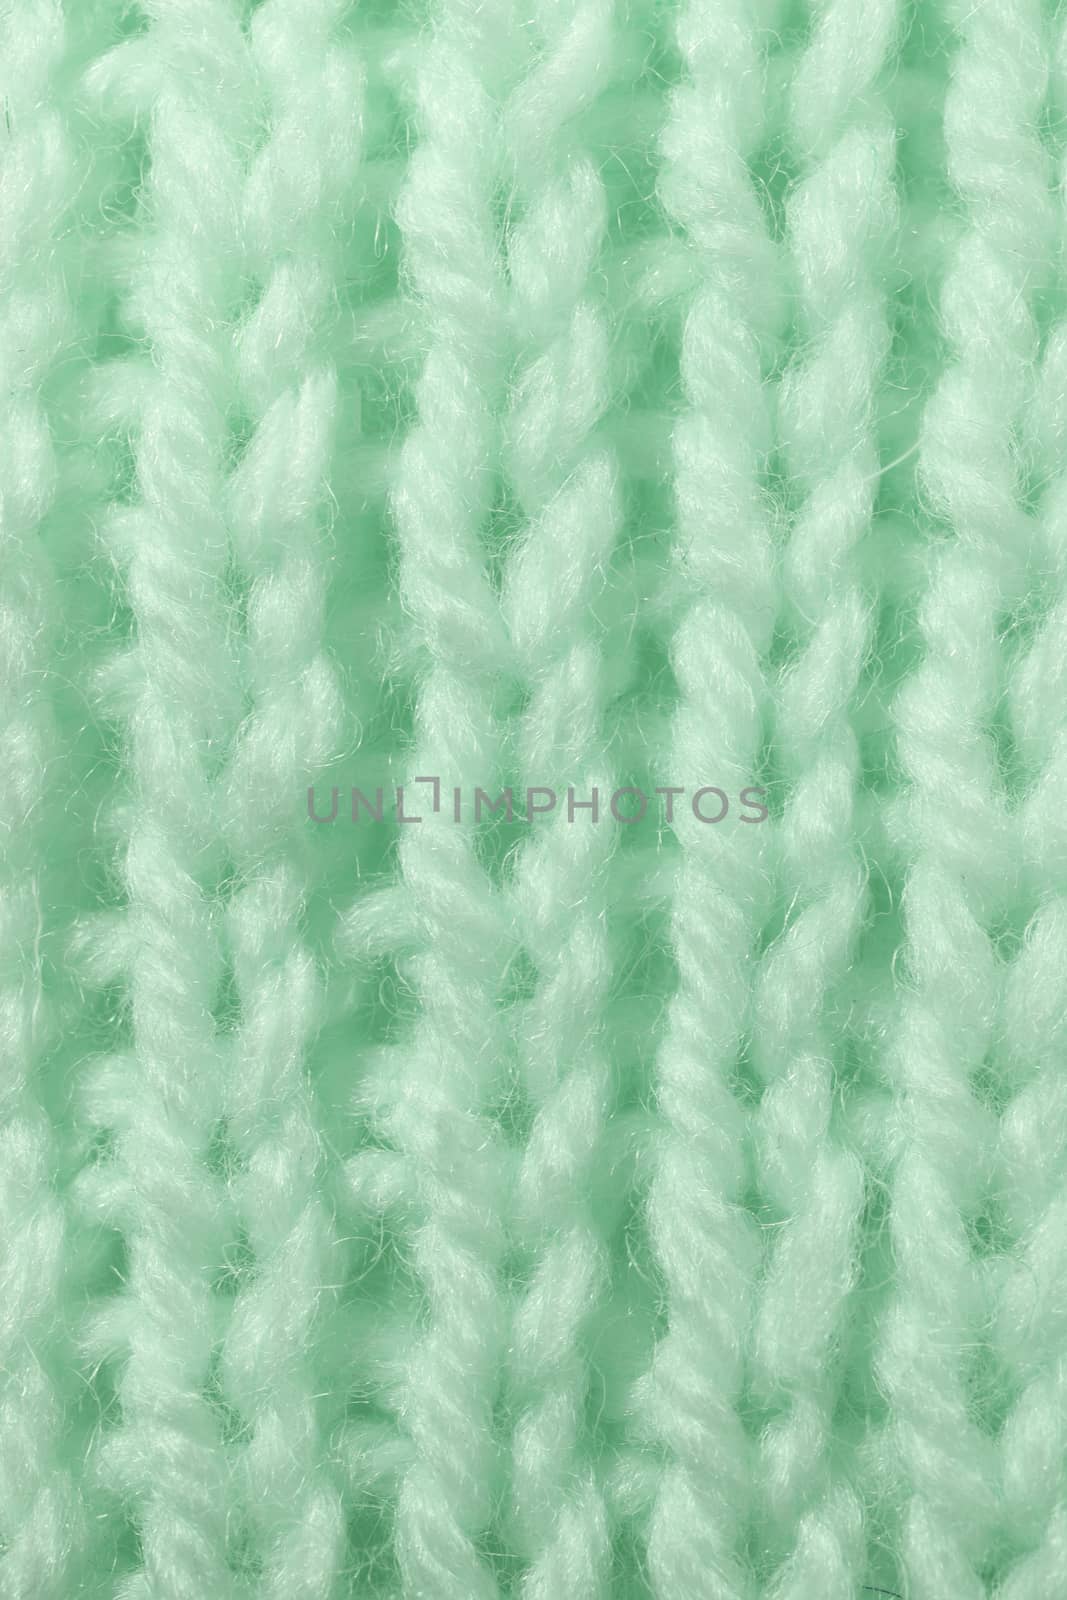 Light Green Wool Knitting Texture. Vertical Across Weaving Crochet Detailed Rows. Sweater Textile Background. Macro Closeup. by sanches812